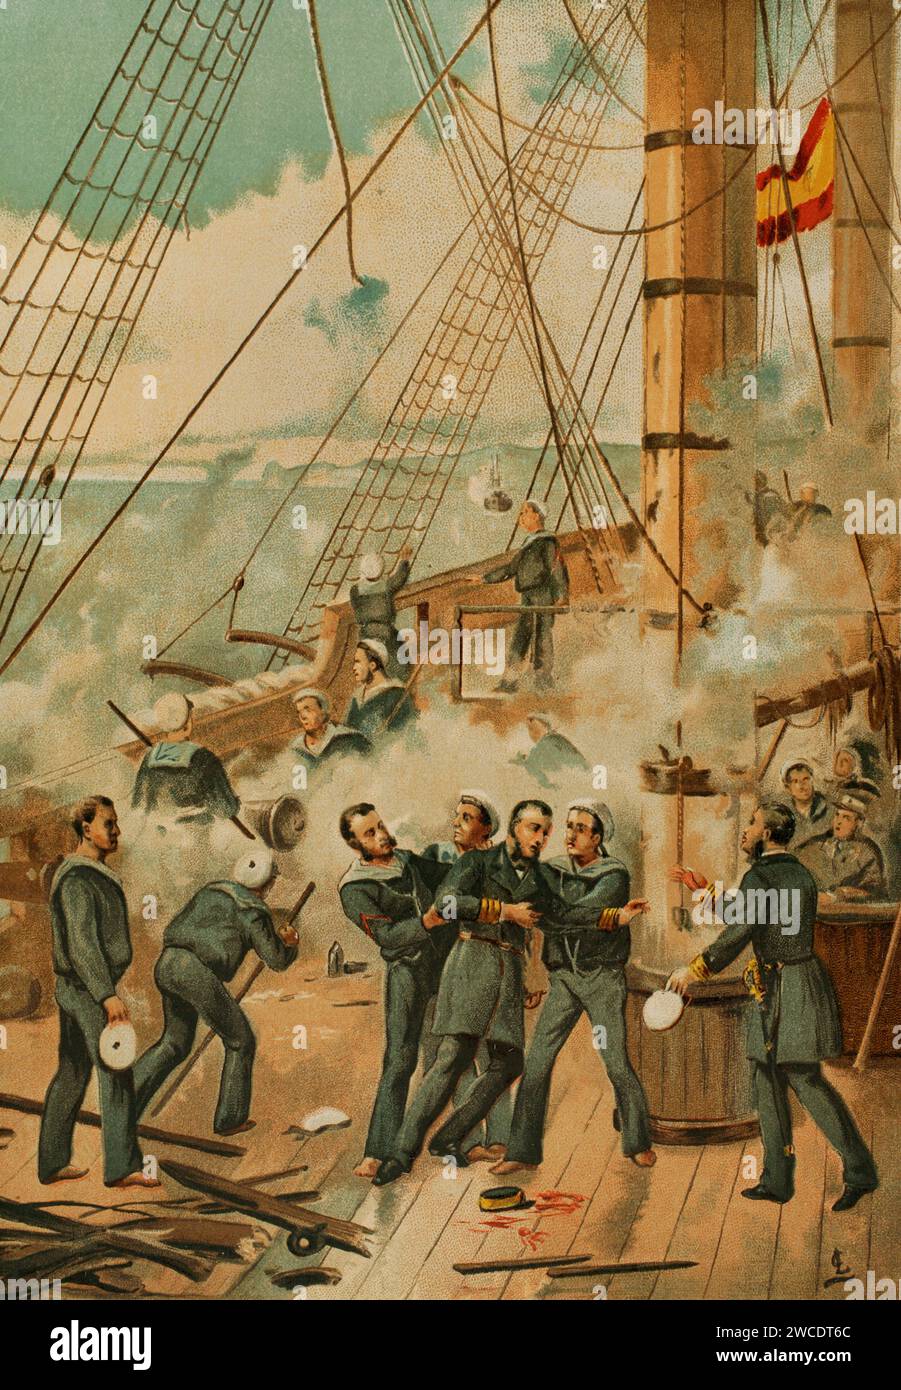 Spanish-South American War. Battle of Callao (2 May 1866). Confrontation in the Peruvian port of Callao between the Spanish fleet, under the command of Admiral Casto Méndez Núñez (1824-1869), and the fortified Peruvian battery emplacements which defended the port. Casto Méndez Núñez wounded during the battle. Chromolithography. 'Historia Universal', by César Cantú. Volume X, 1881. Stock Photo